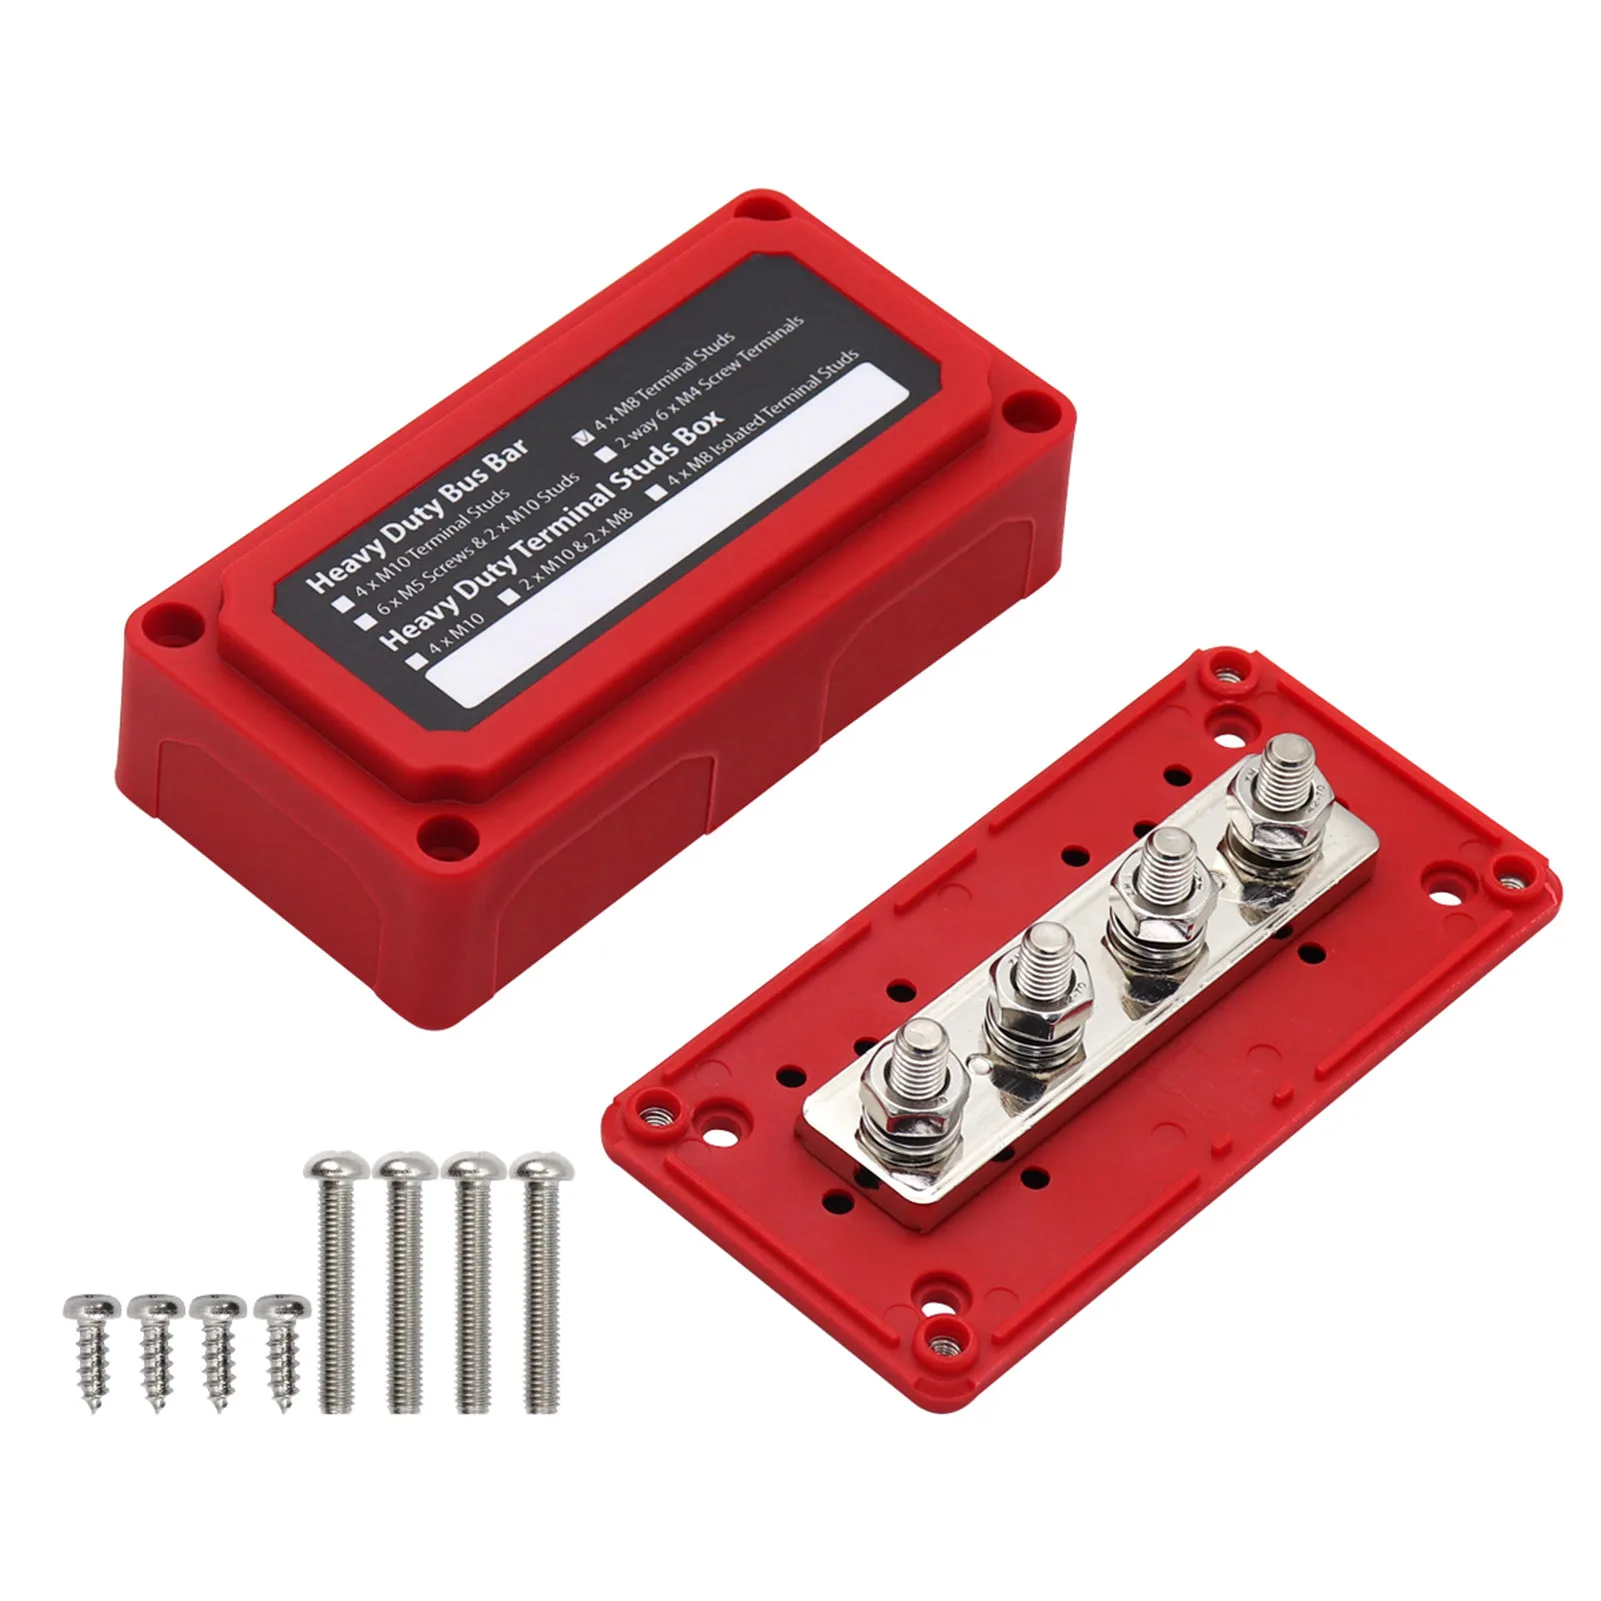 Heavy Duty Bus Bar Box with 4 M8 Terminal Studs 48V 300A Post Battery Junction Block for Car RV Truck Marine Boat